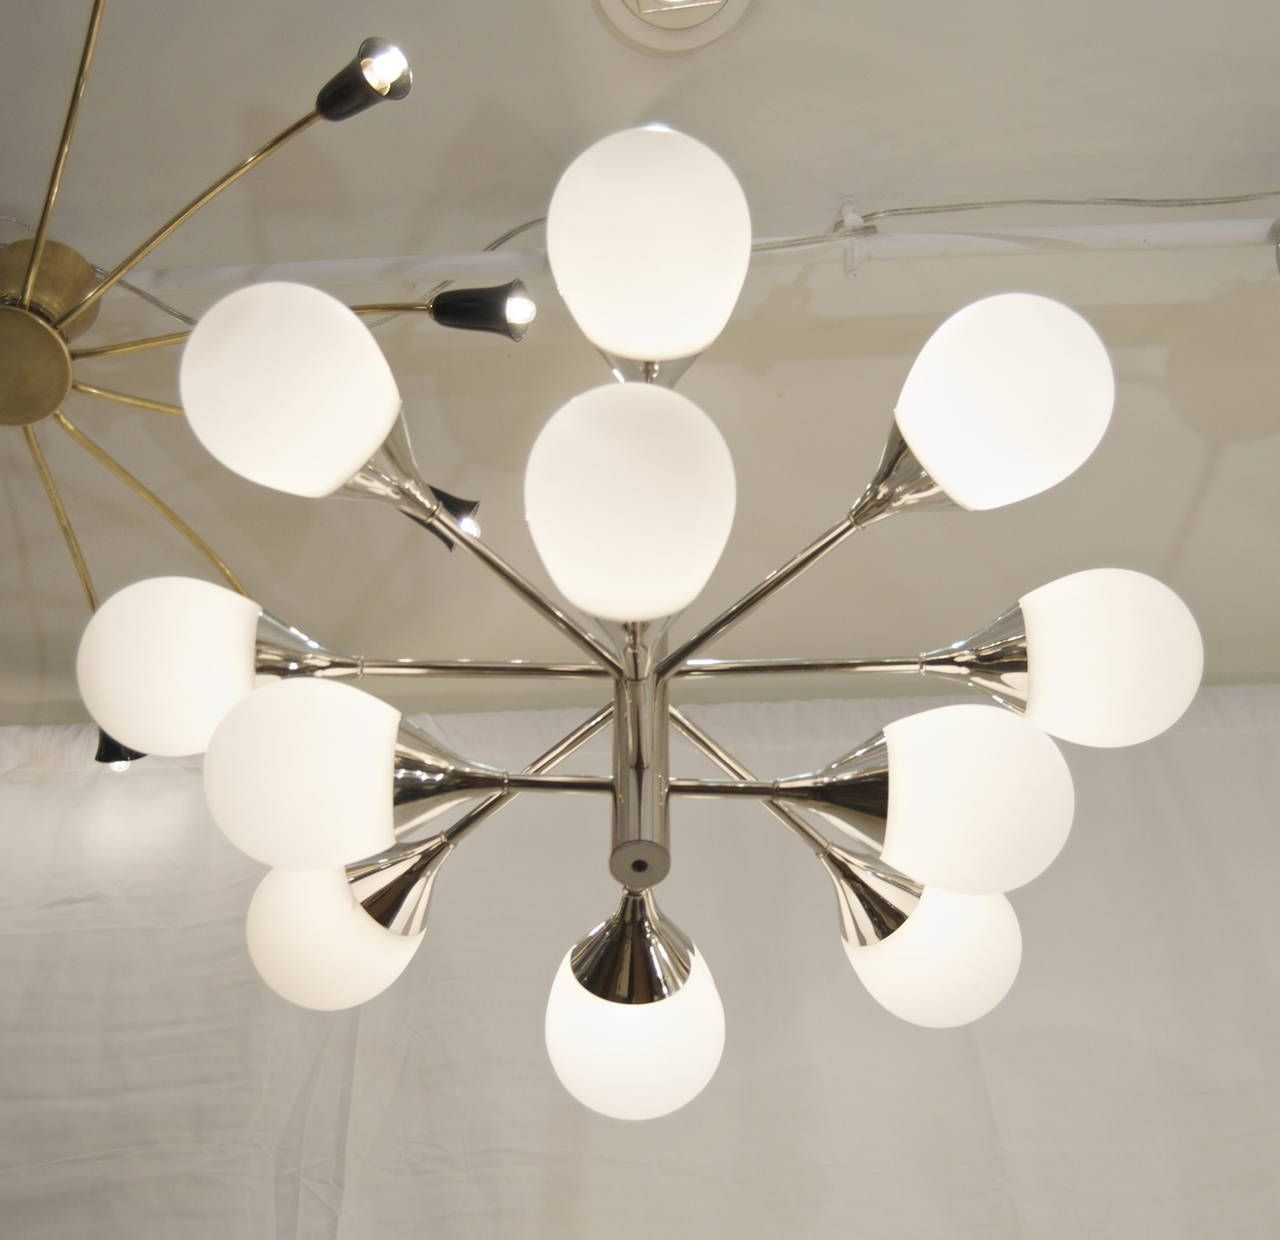 Globe Chandeliers Home Design Ideas Pertaining To Globe Chandeliers (View 11 of 12)